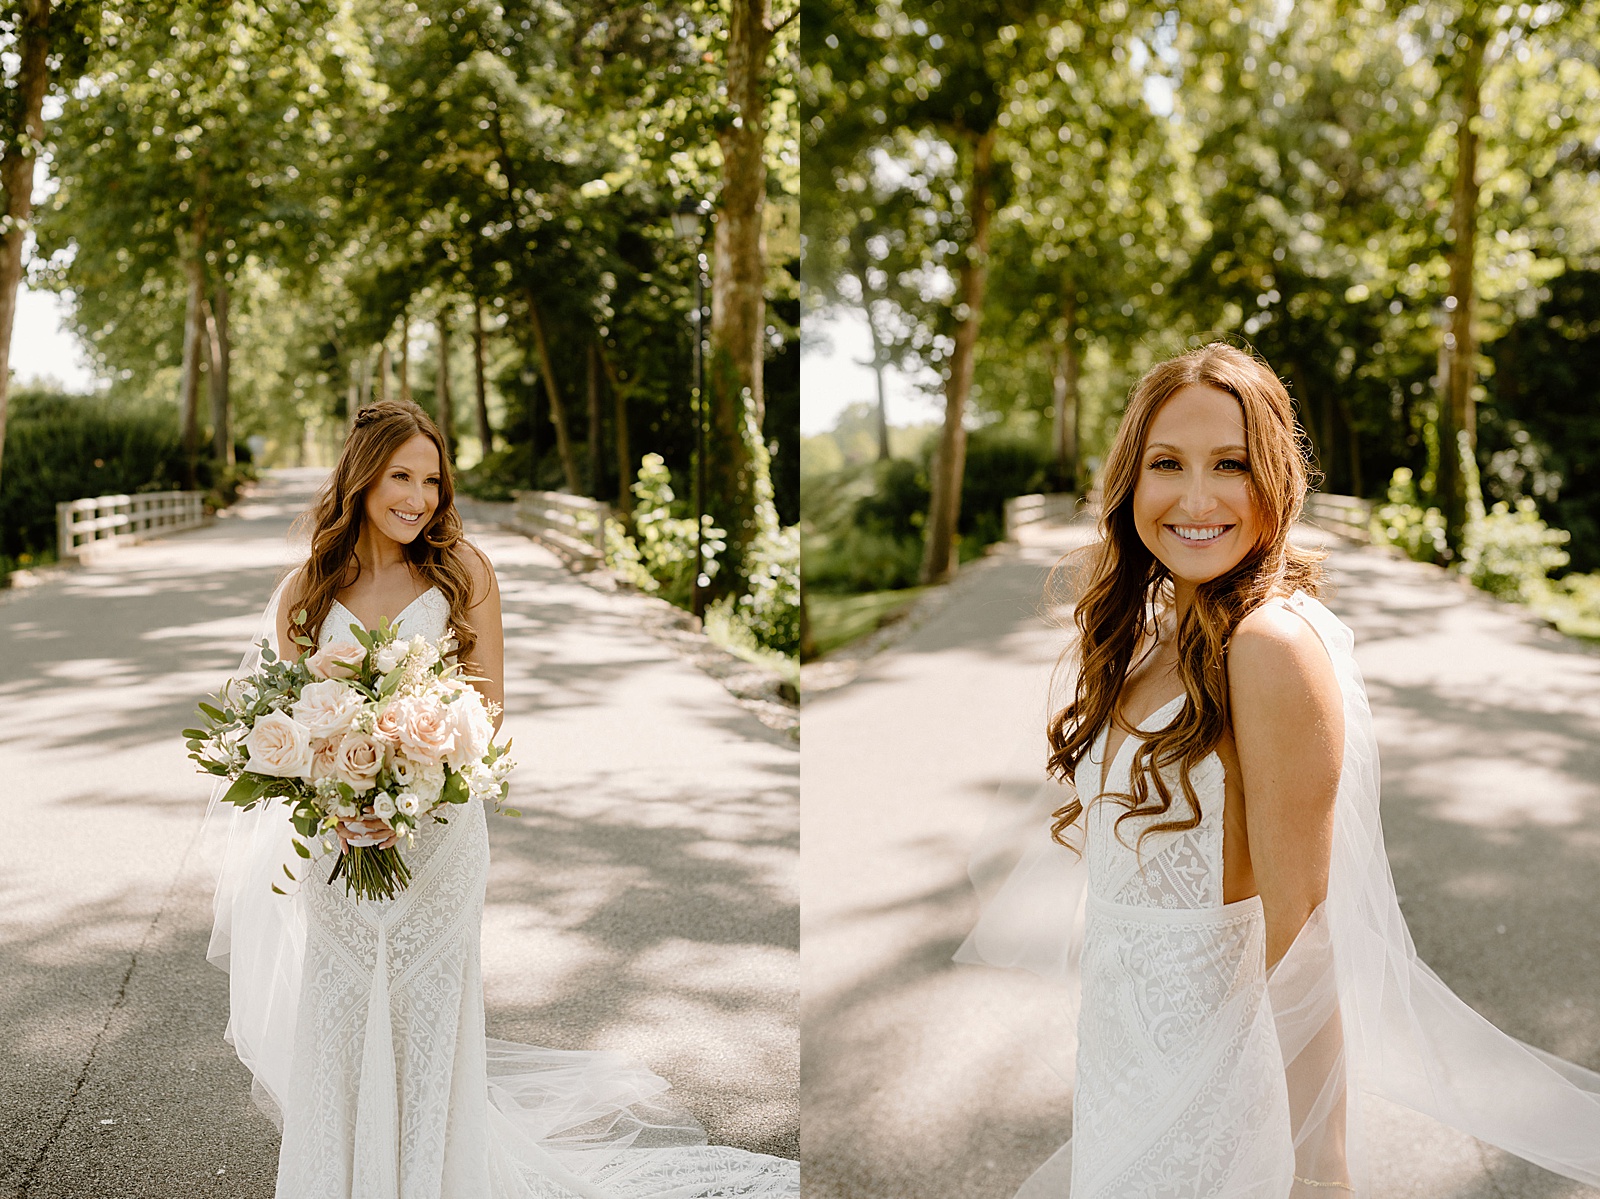 Bride with large bouquet of flowers under trees for her Sycamore Hills Summer Wedding.